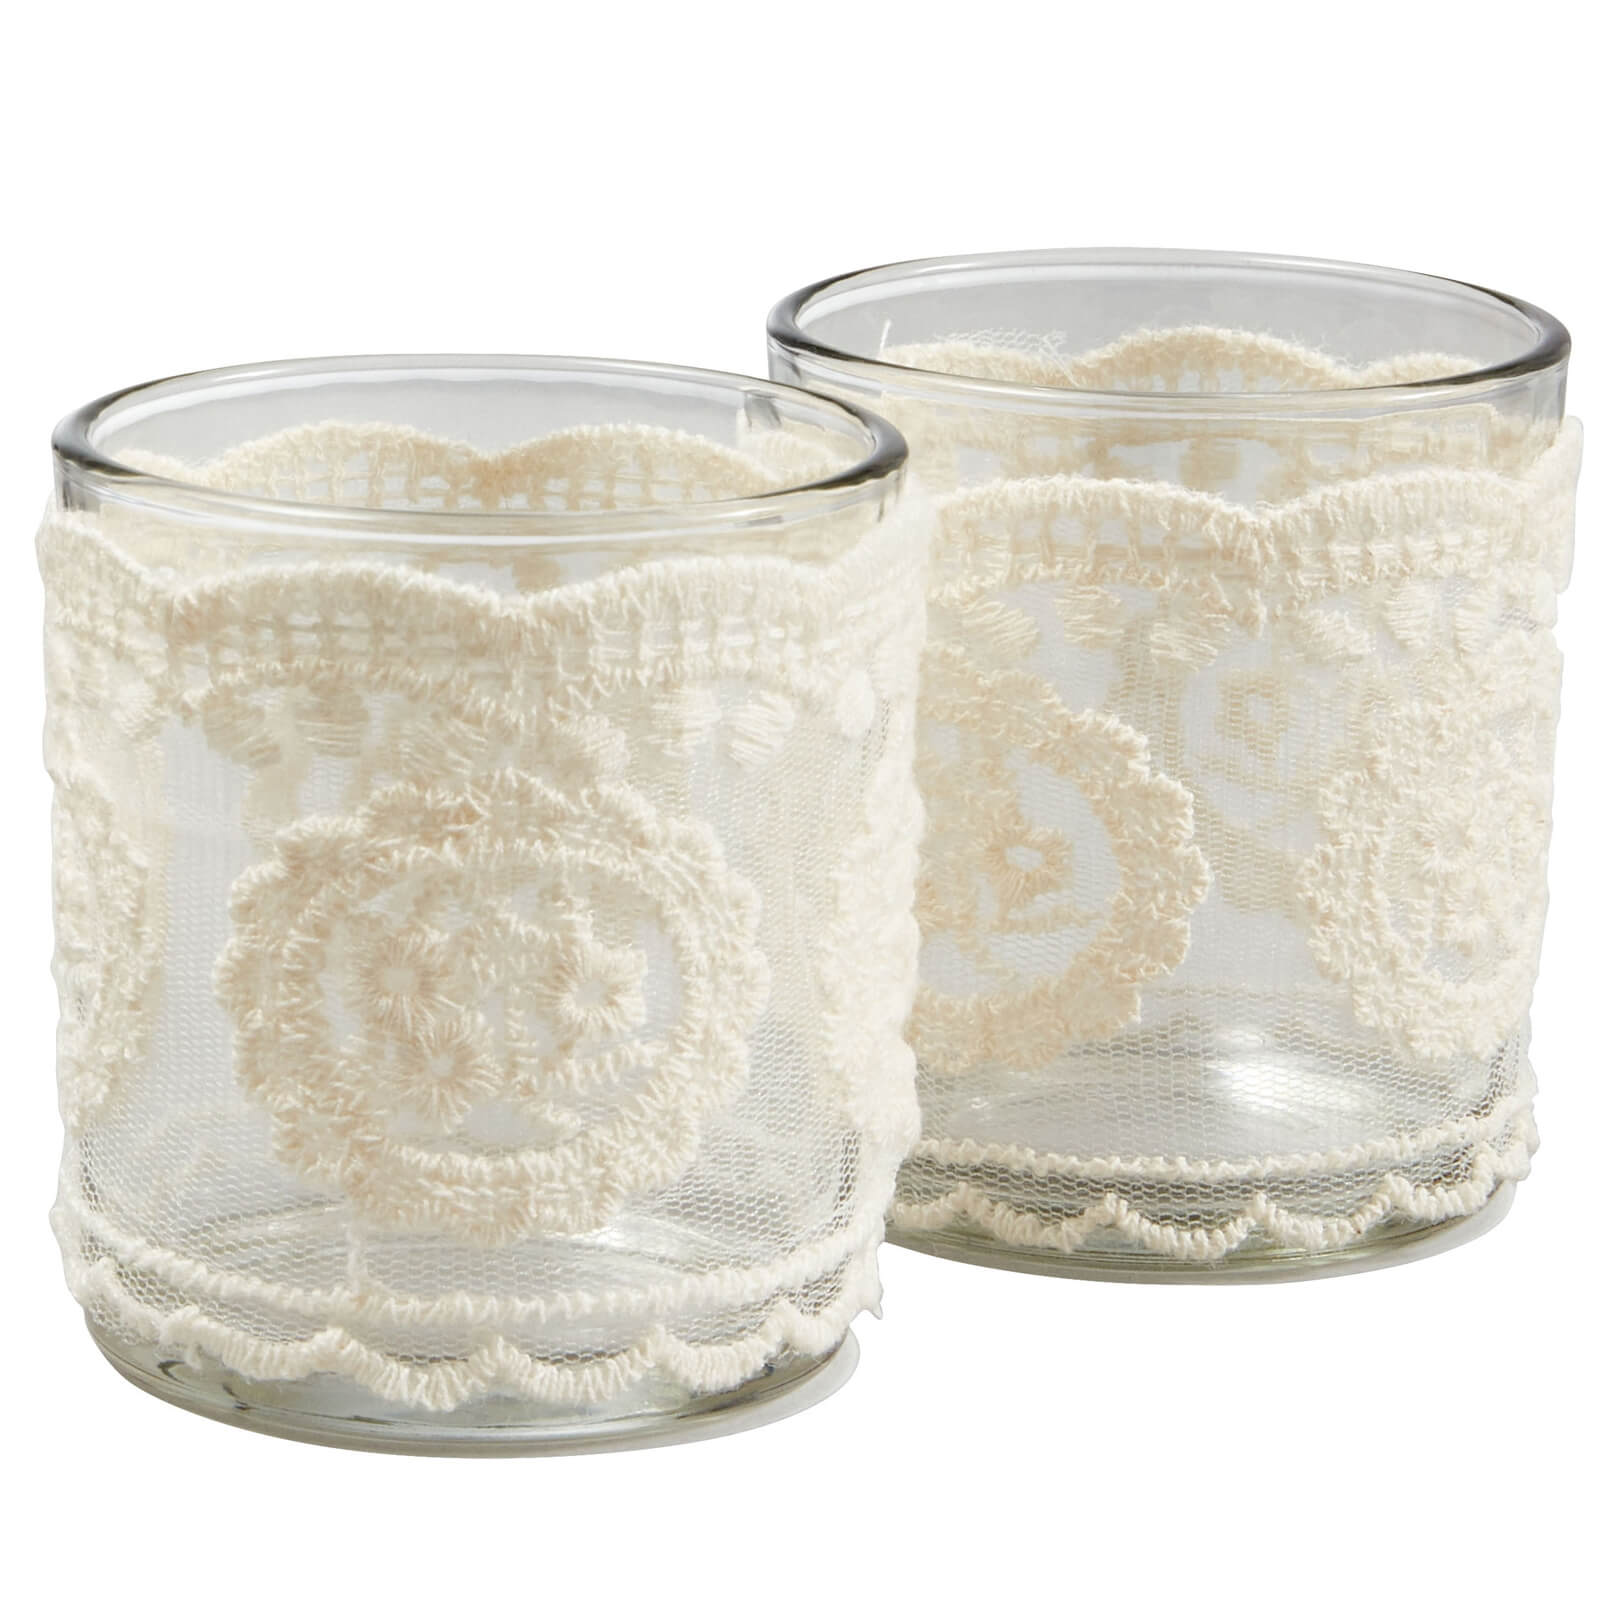 Set of 2 Tealight Candle Holders - Lace